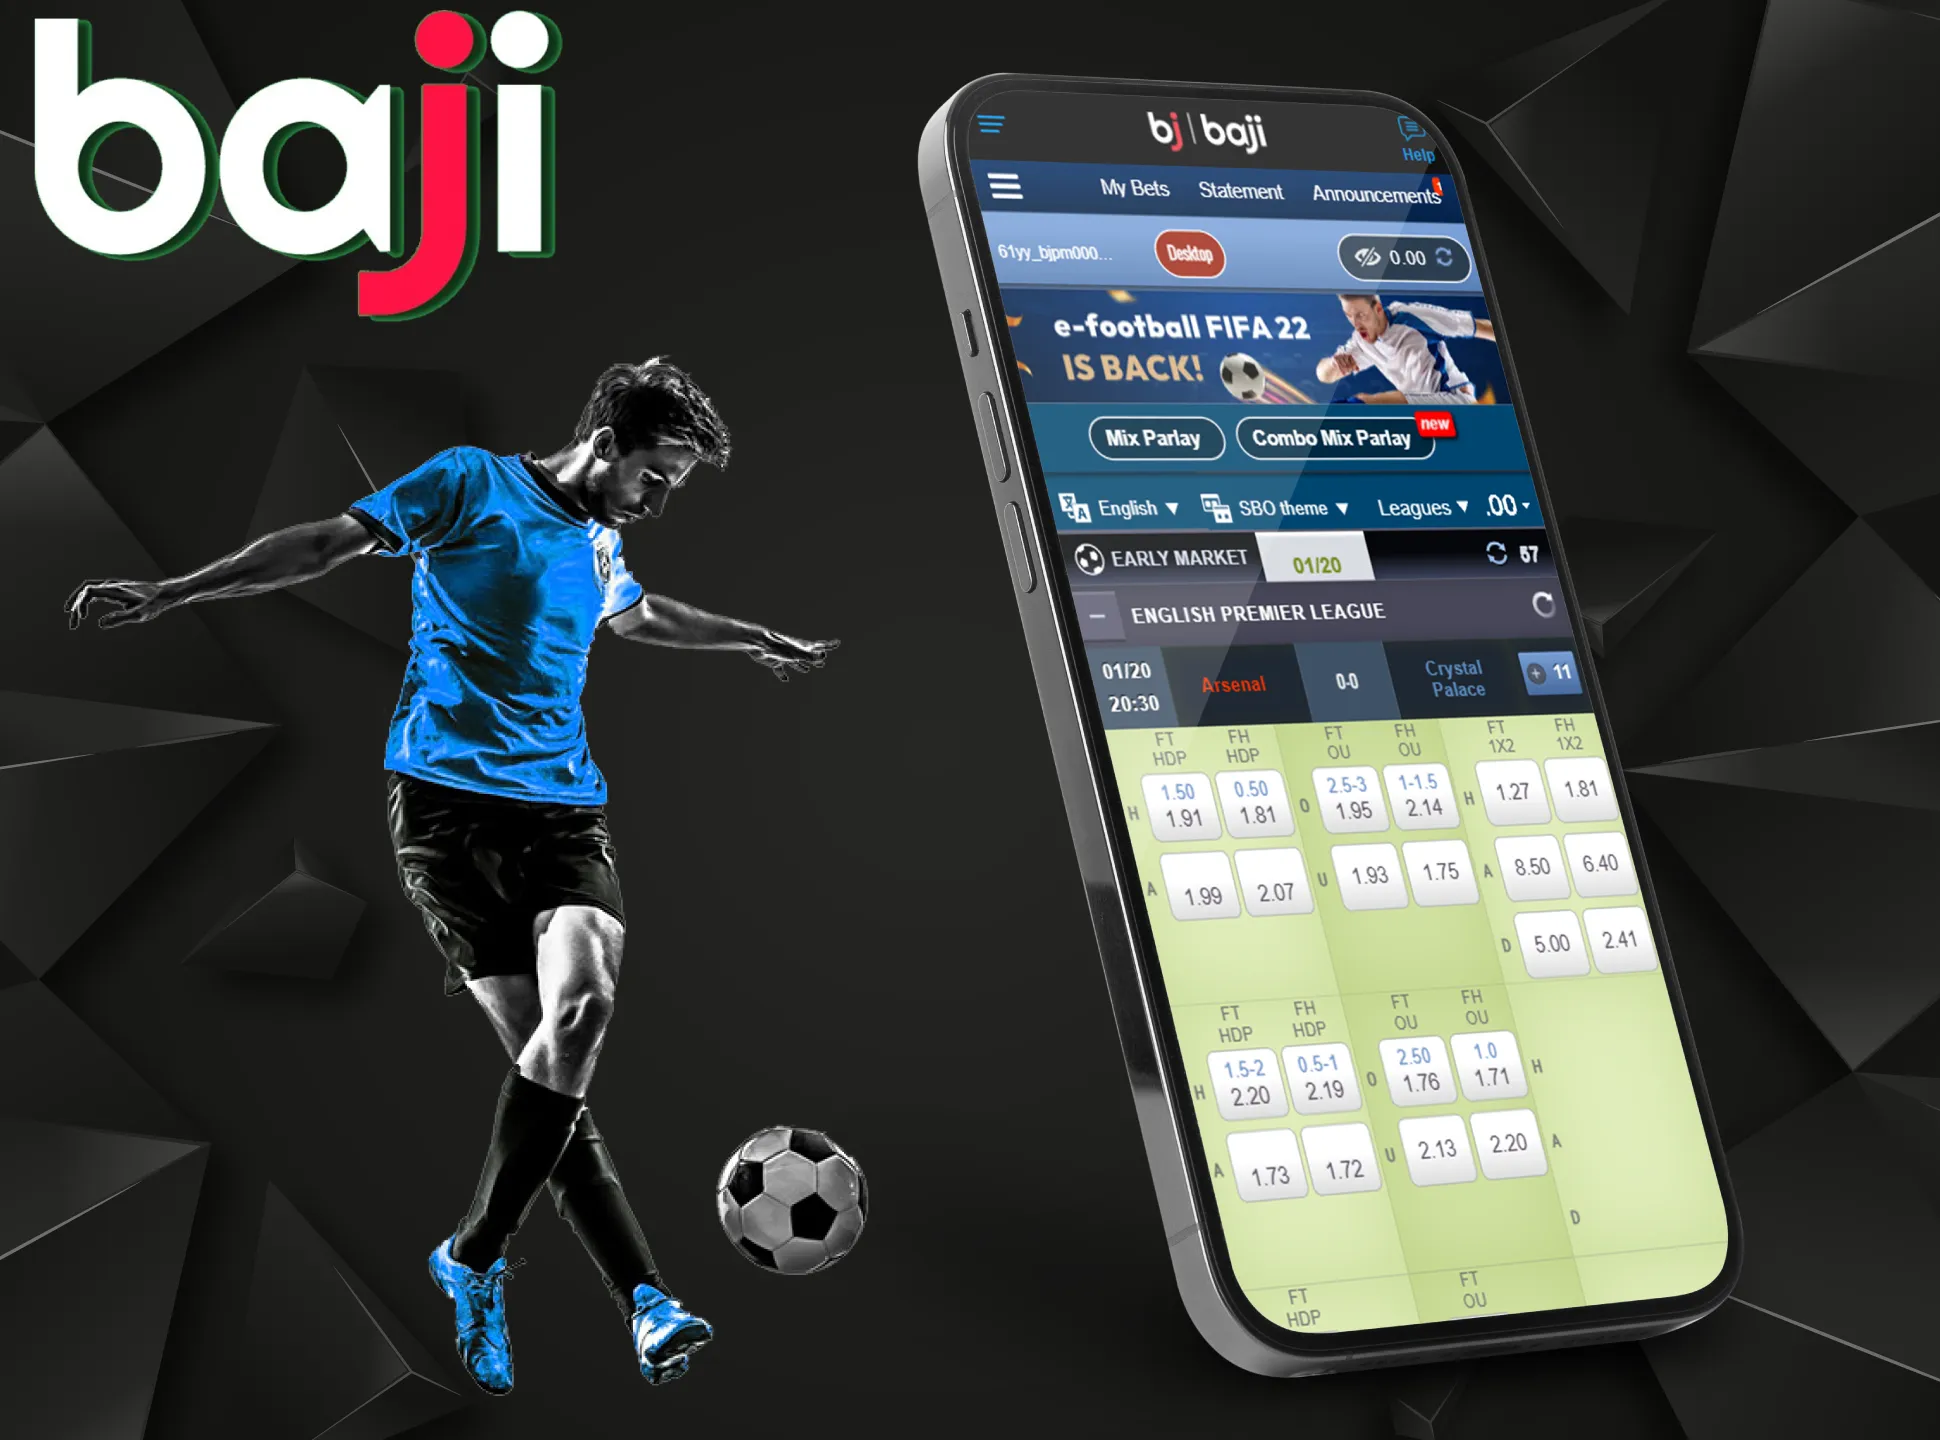 Choose the favorite football team and place bets on it in the Baji sportsbook.